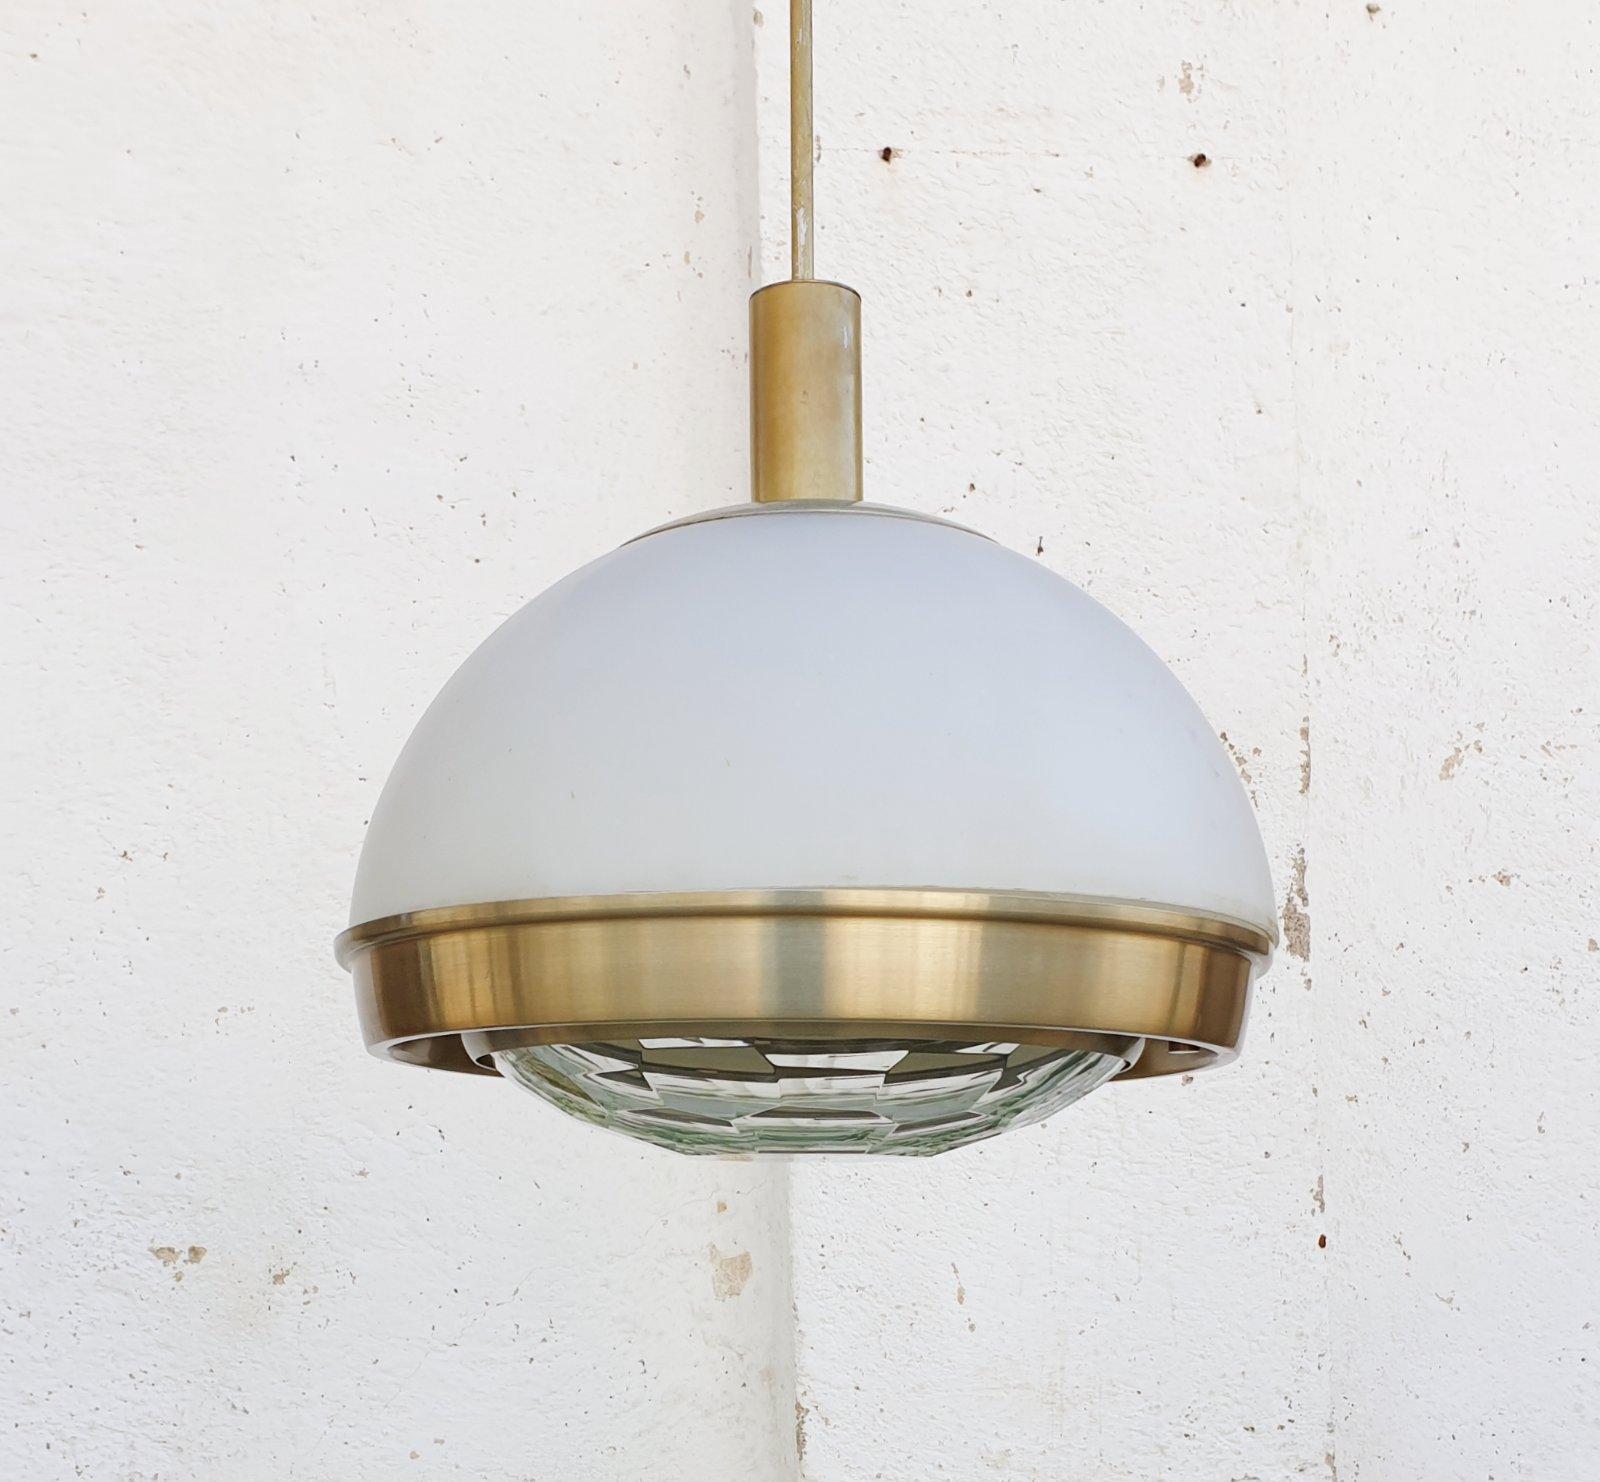 Rare ceiling lamp designed by Pia Giudetti Crippa for Lumi Milano
In perfect working conditions.
This suspension lamp in brushed gold aluminum, upper diffuser in satin glass and lower diffuser in thick transparent faceted glass. 